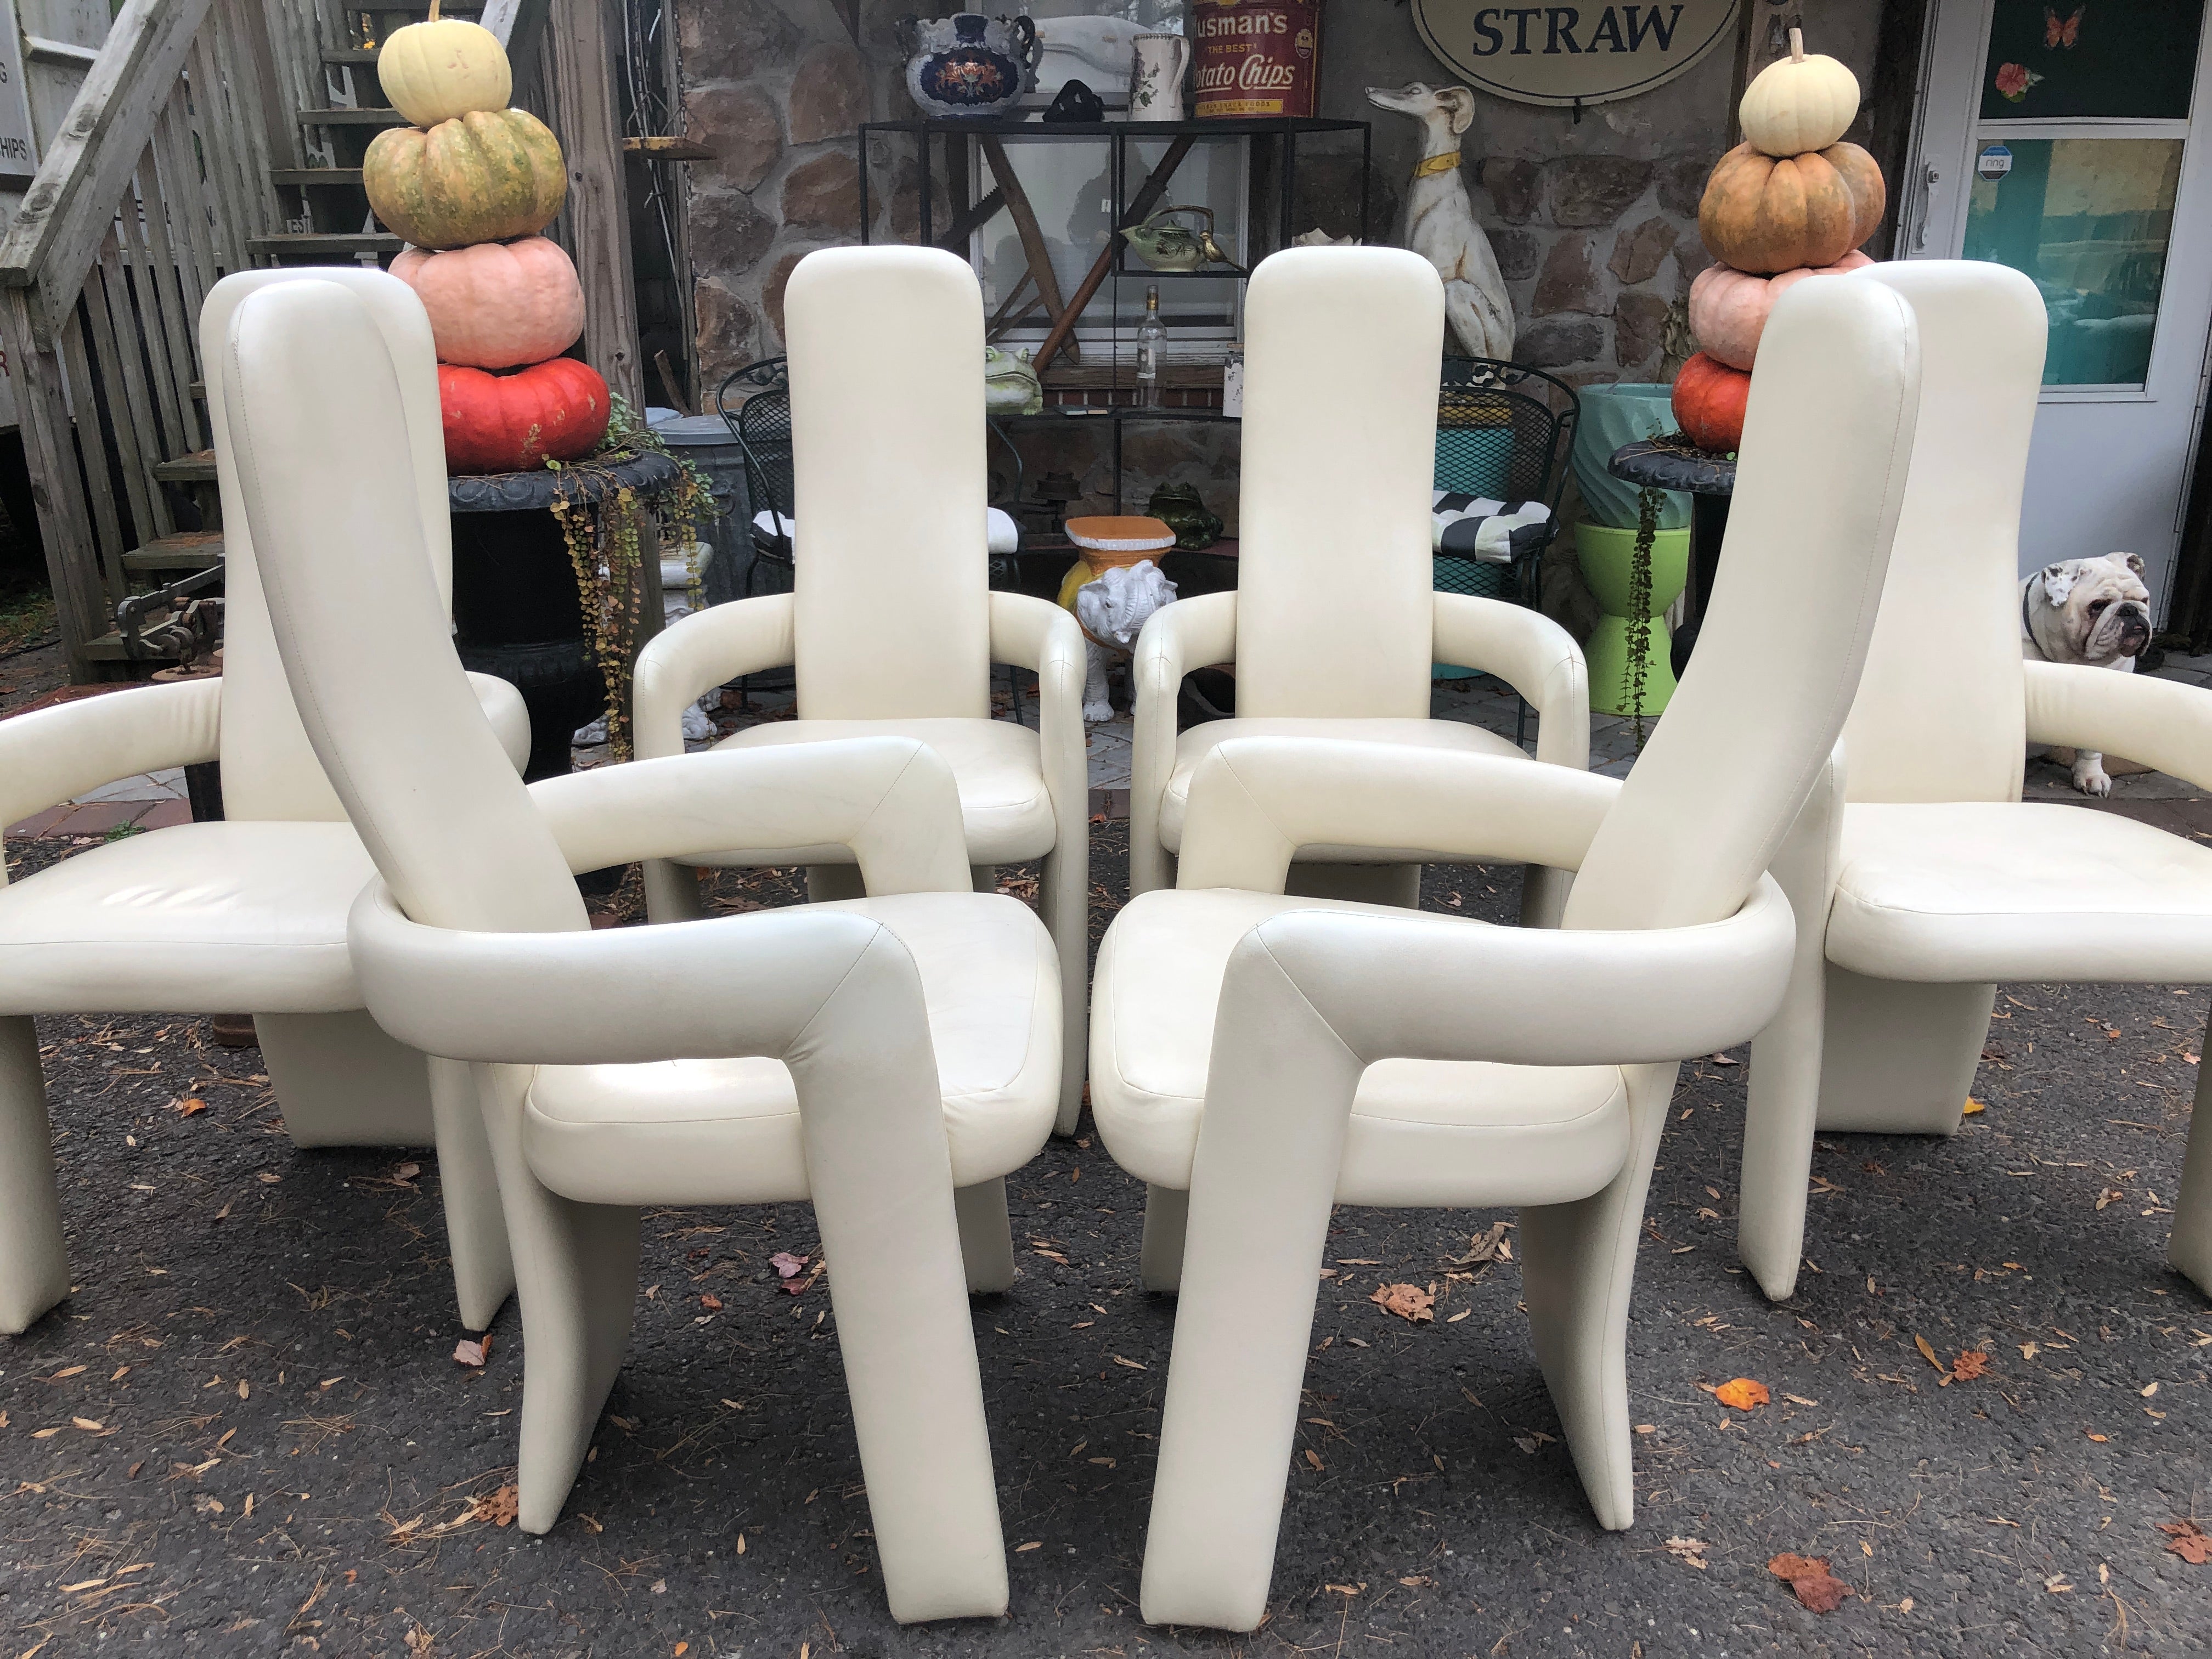 Stunning statuesque set of 6 Postmodern tall back dining chairs, four side chairs and two armchairs. They each have tall, narrow backs with rounded top corners and a lumbar curve, extending down to the floor, while the seat is nestled in a curved